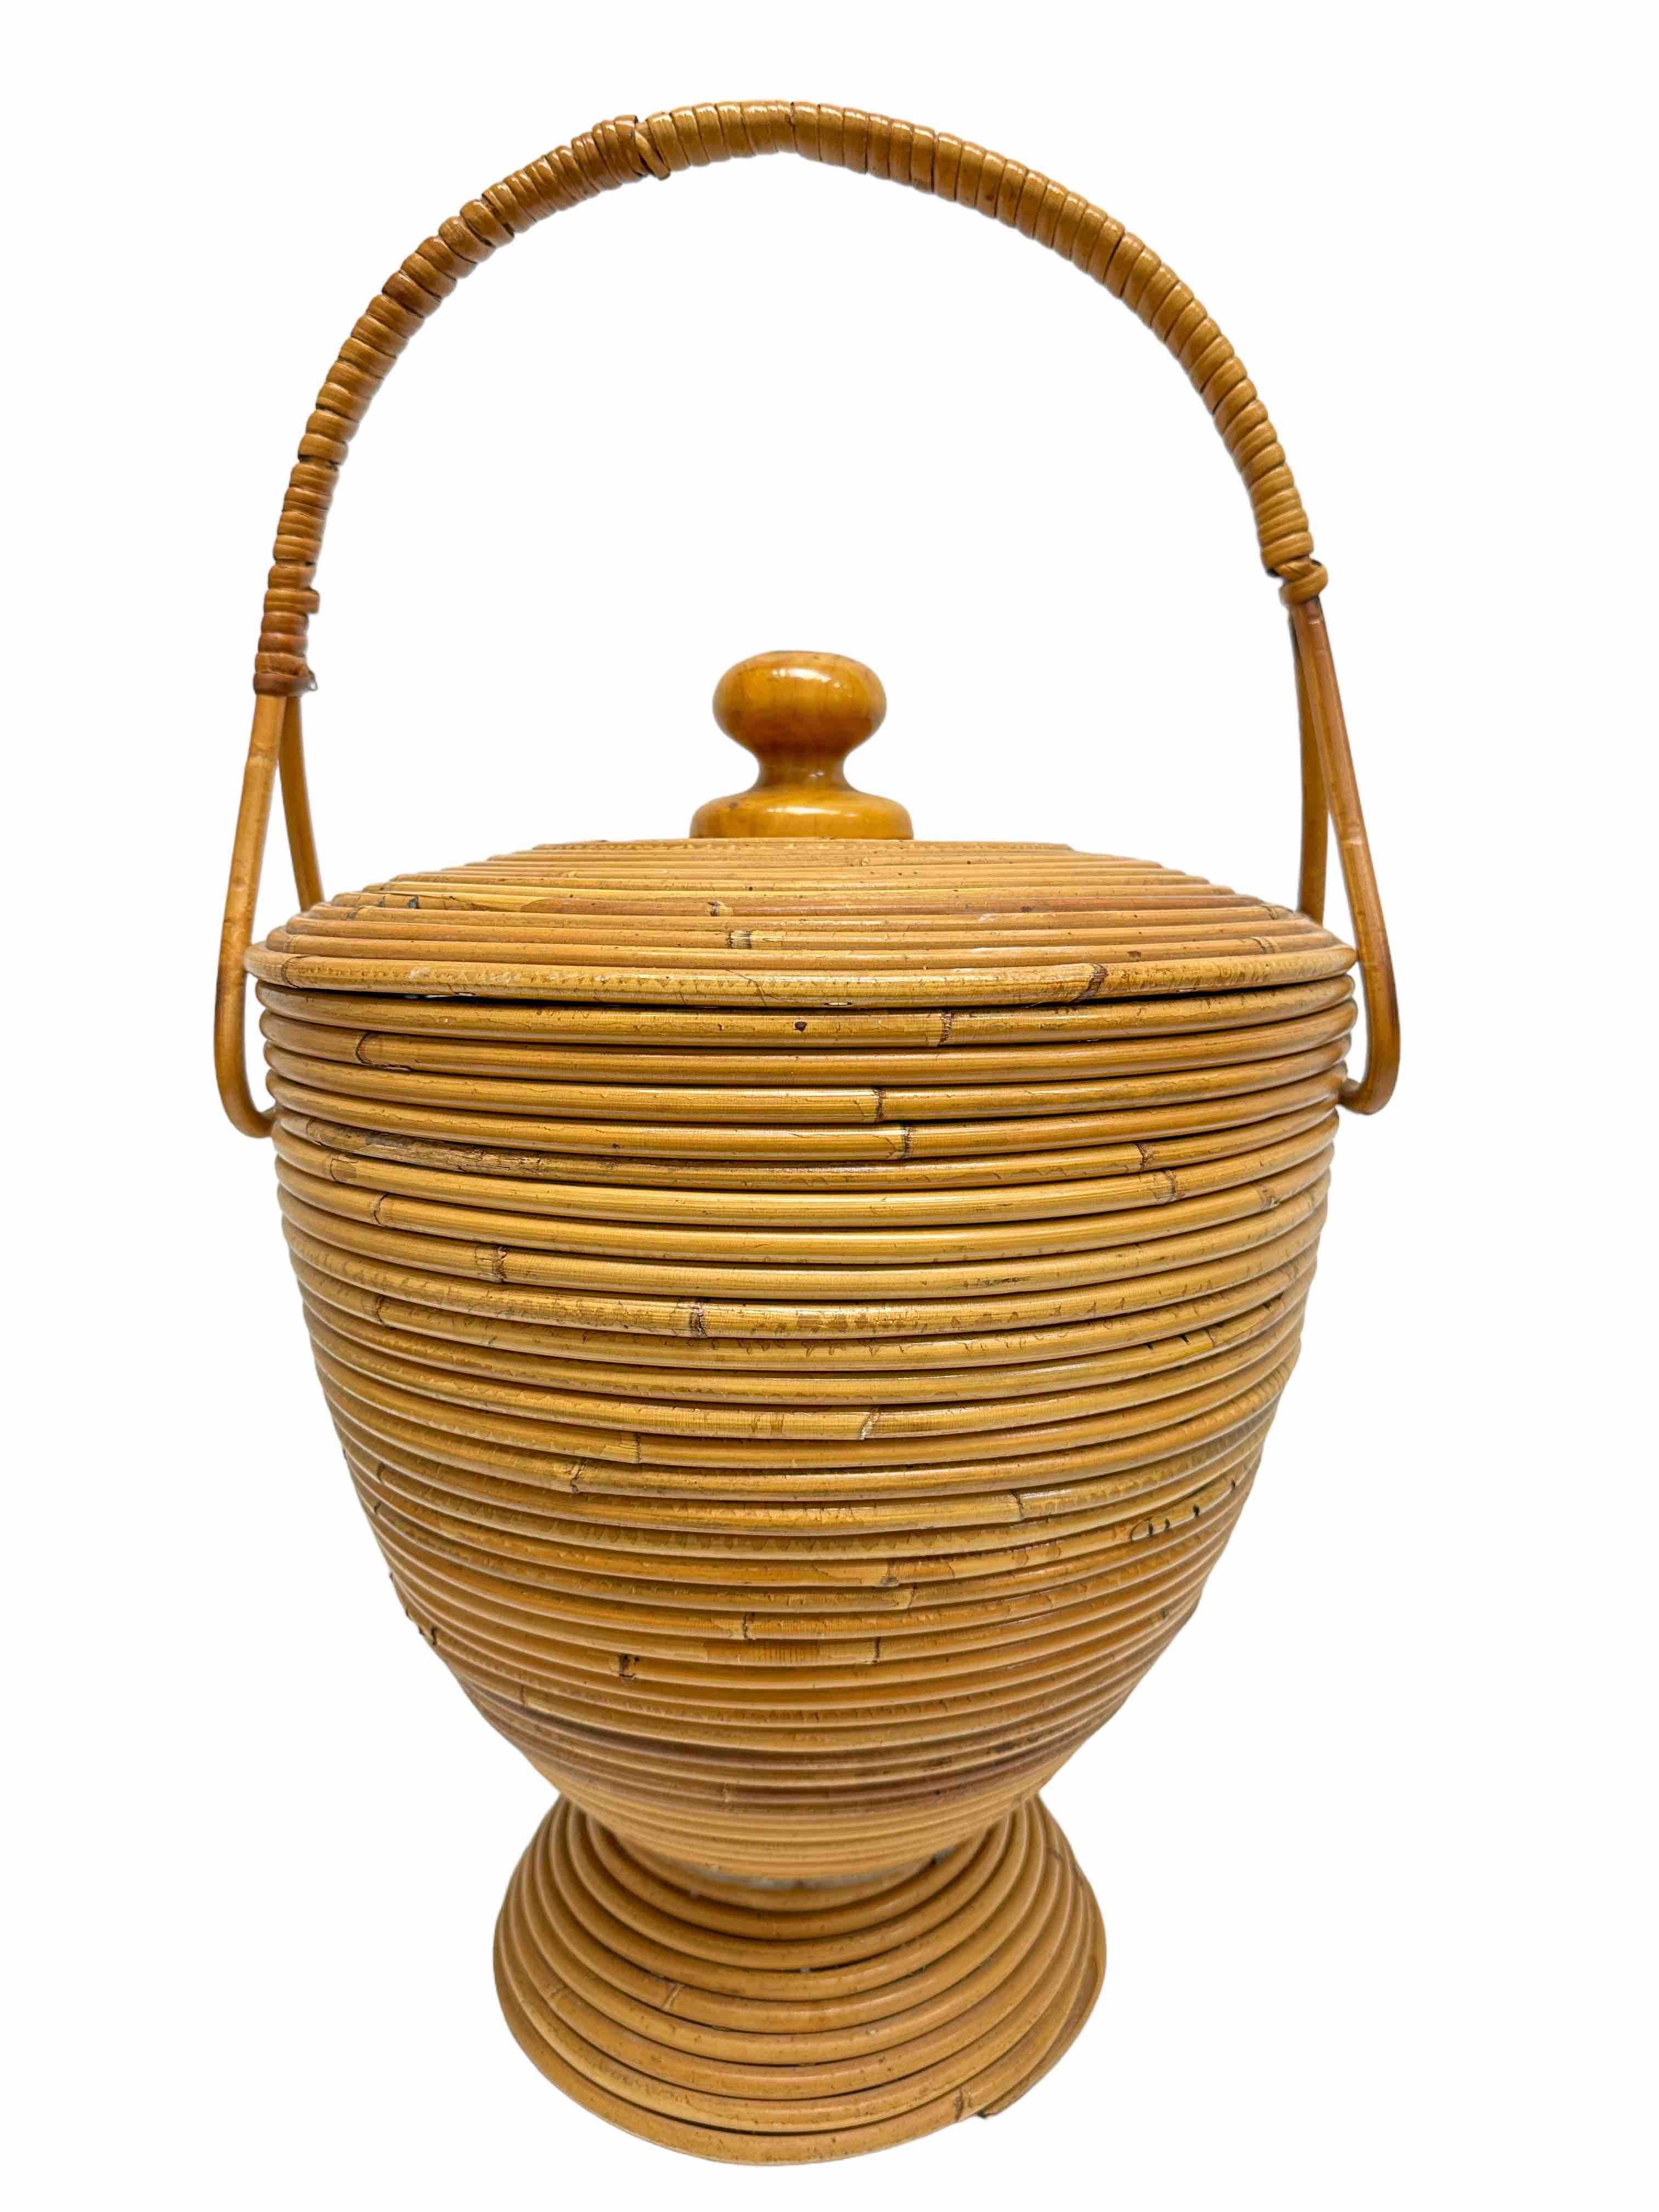 Beautiful Vivai del Sud Bamboo Rattan Decorative Basket Catchall, 1970s, Italy For Sale 4